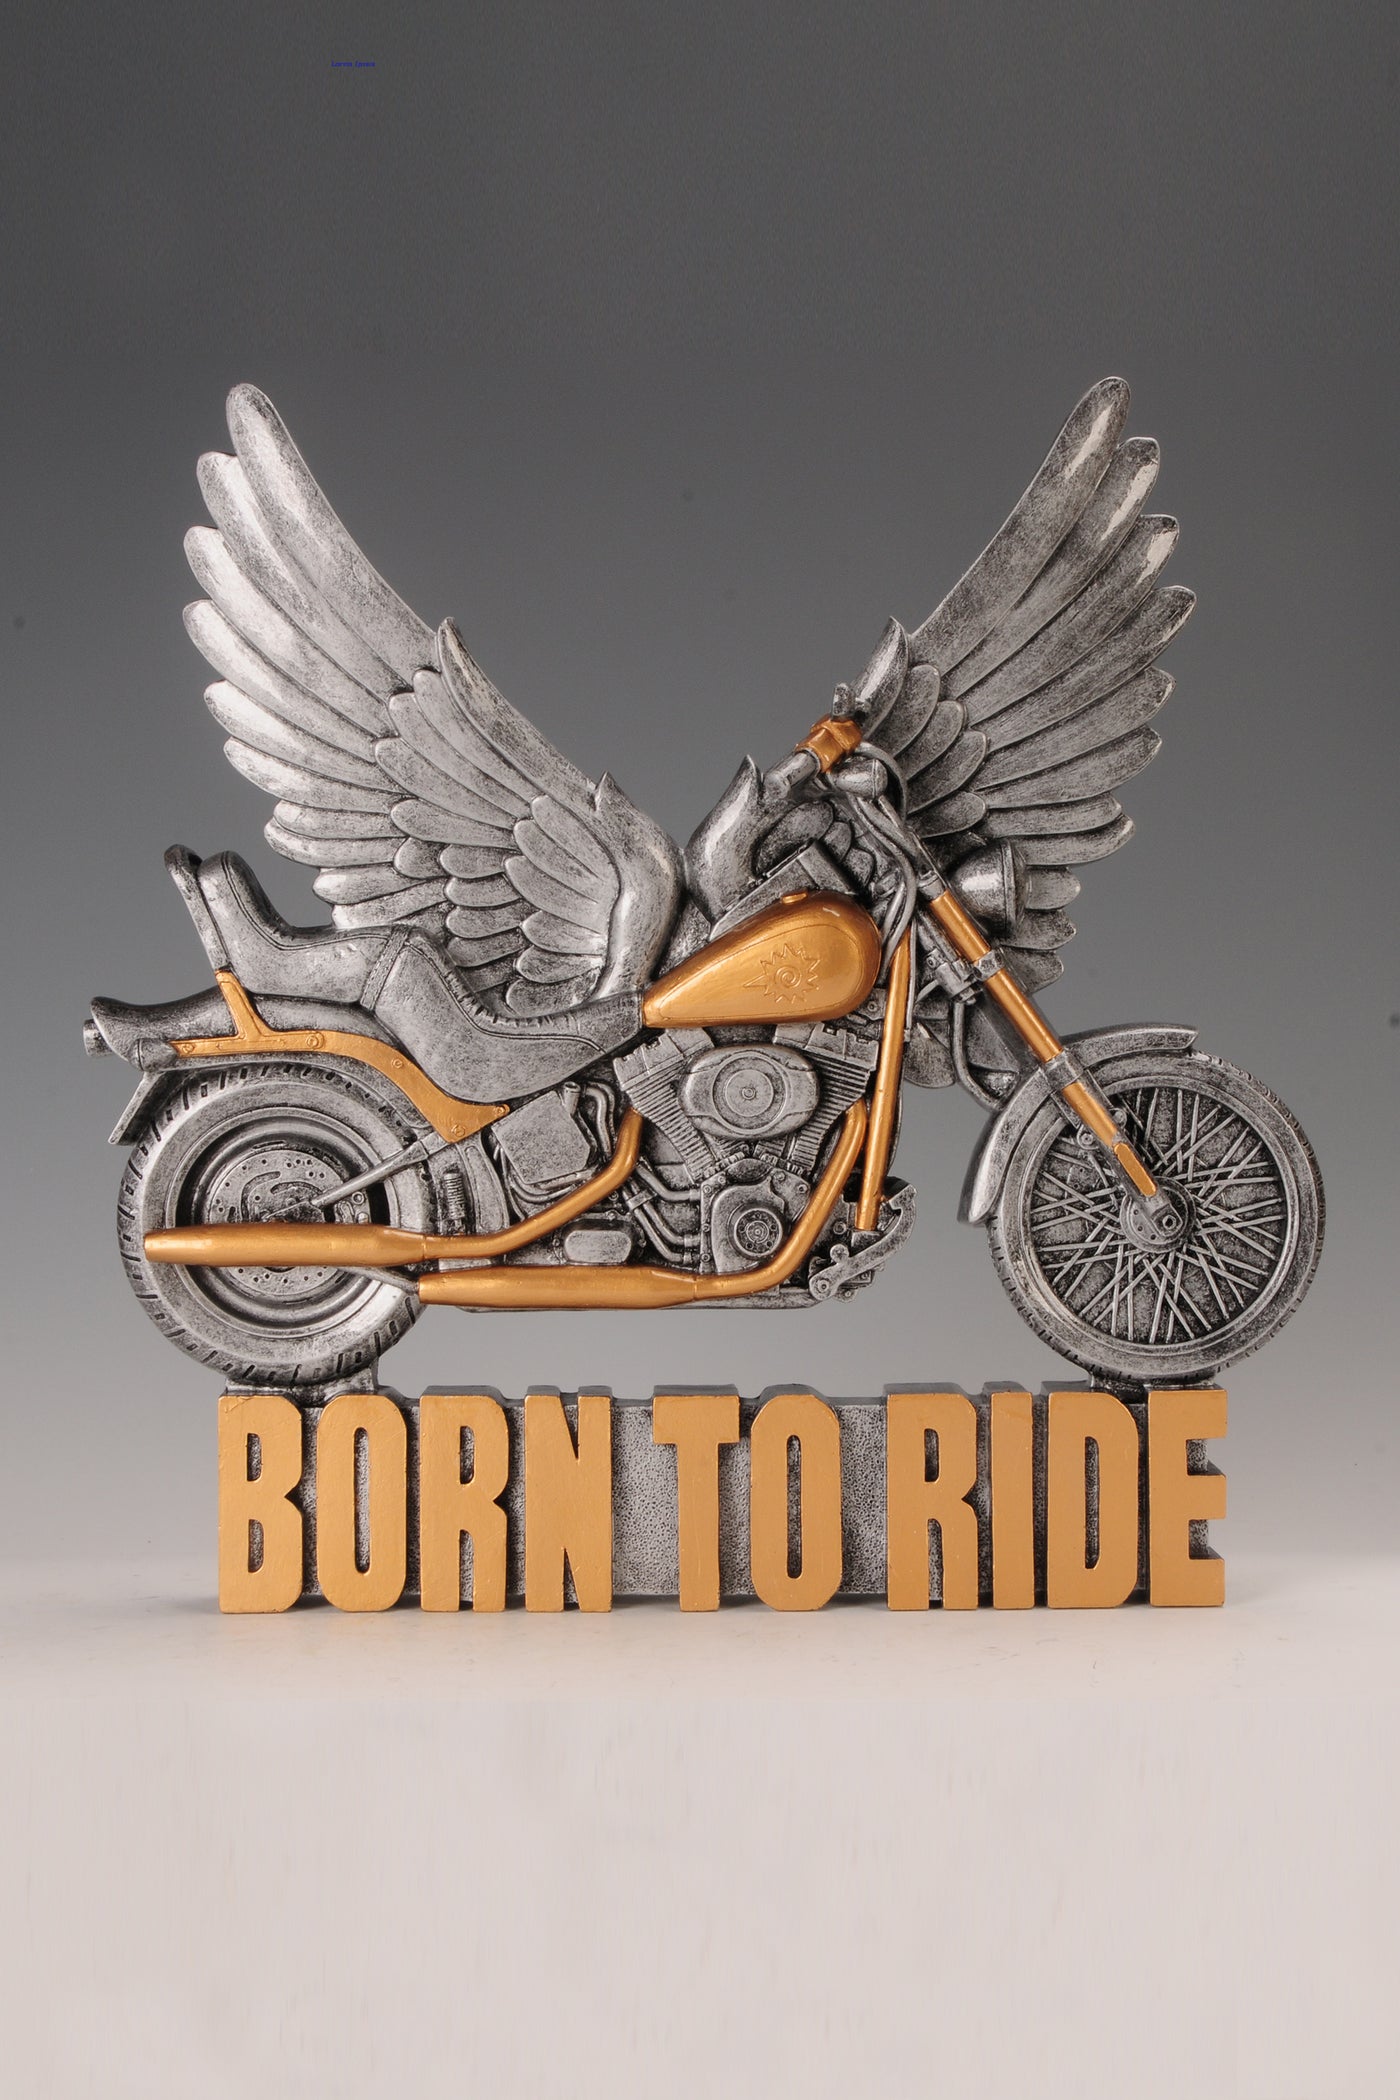 Resin motorcycle showpiece for your home or office decor